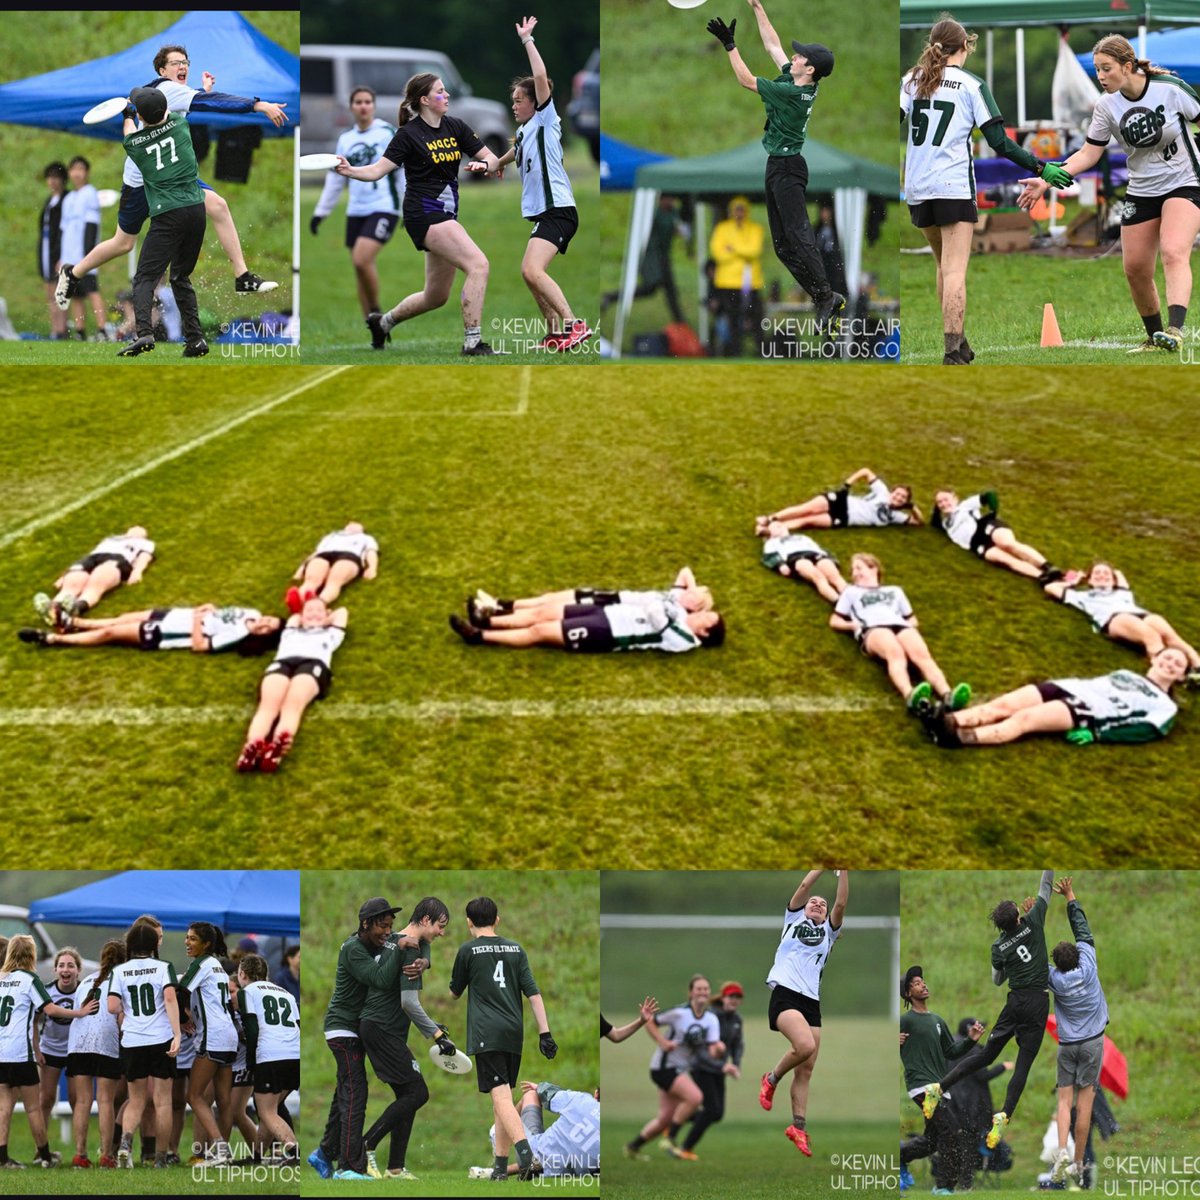 Good morning Tigers! Please let out a huge #TigerRoar for our #UltimateTigers who went 4-0 yesterday at the Ultimate Virginia State Championship! Best of luck on Day 2 Tigers! #LetsGo @jrgirlsultimate and @jrgirlsultimate - #TigerPride💚 - 🔥 📸 @kevinleclairephoto Bio!